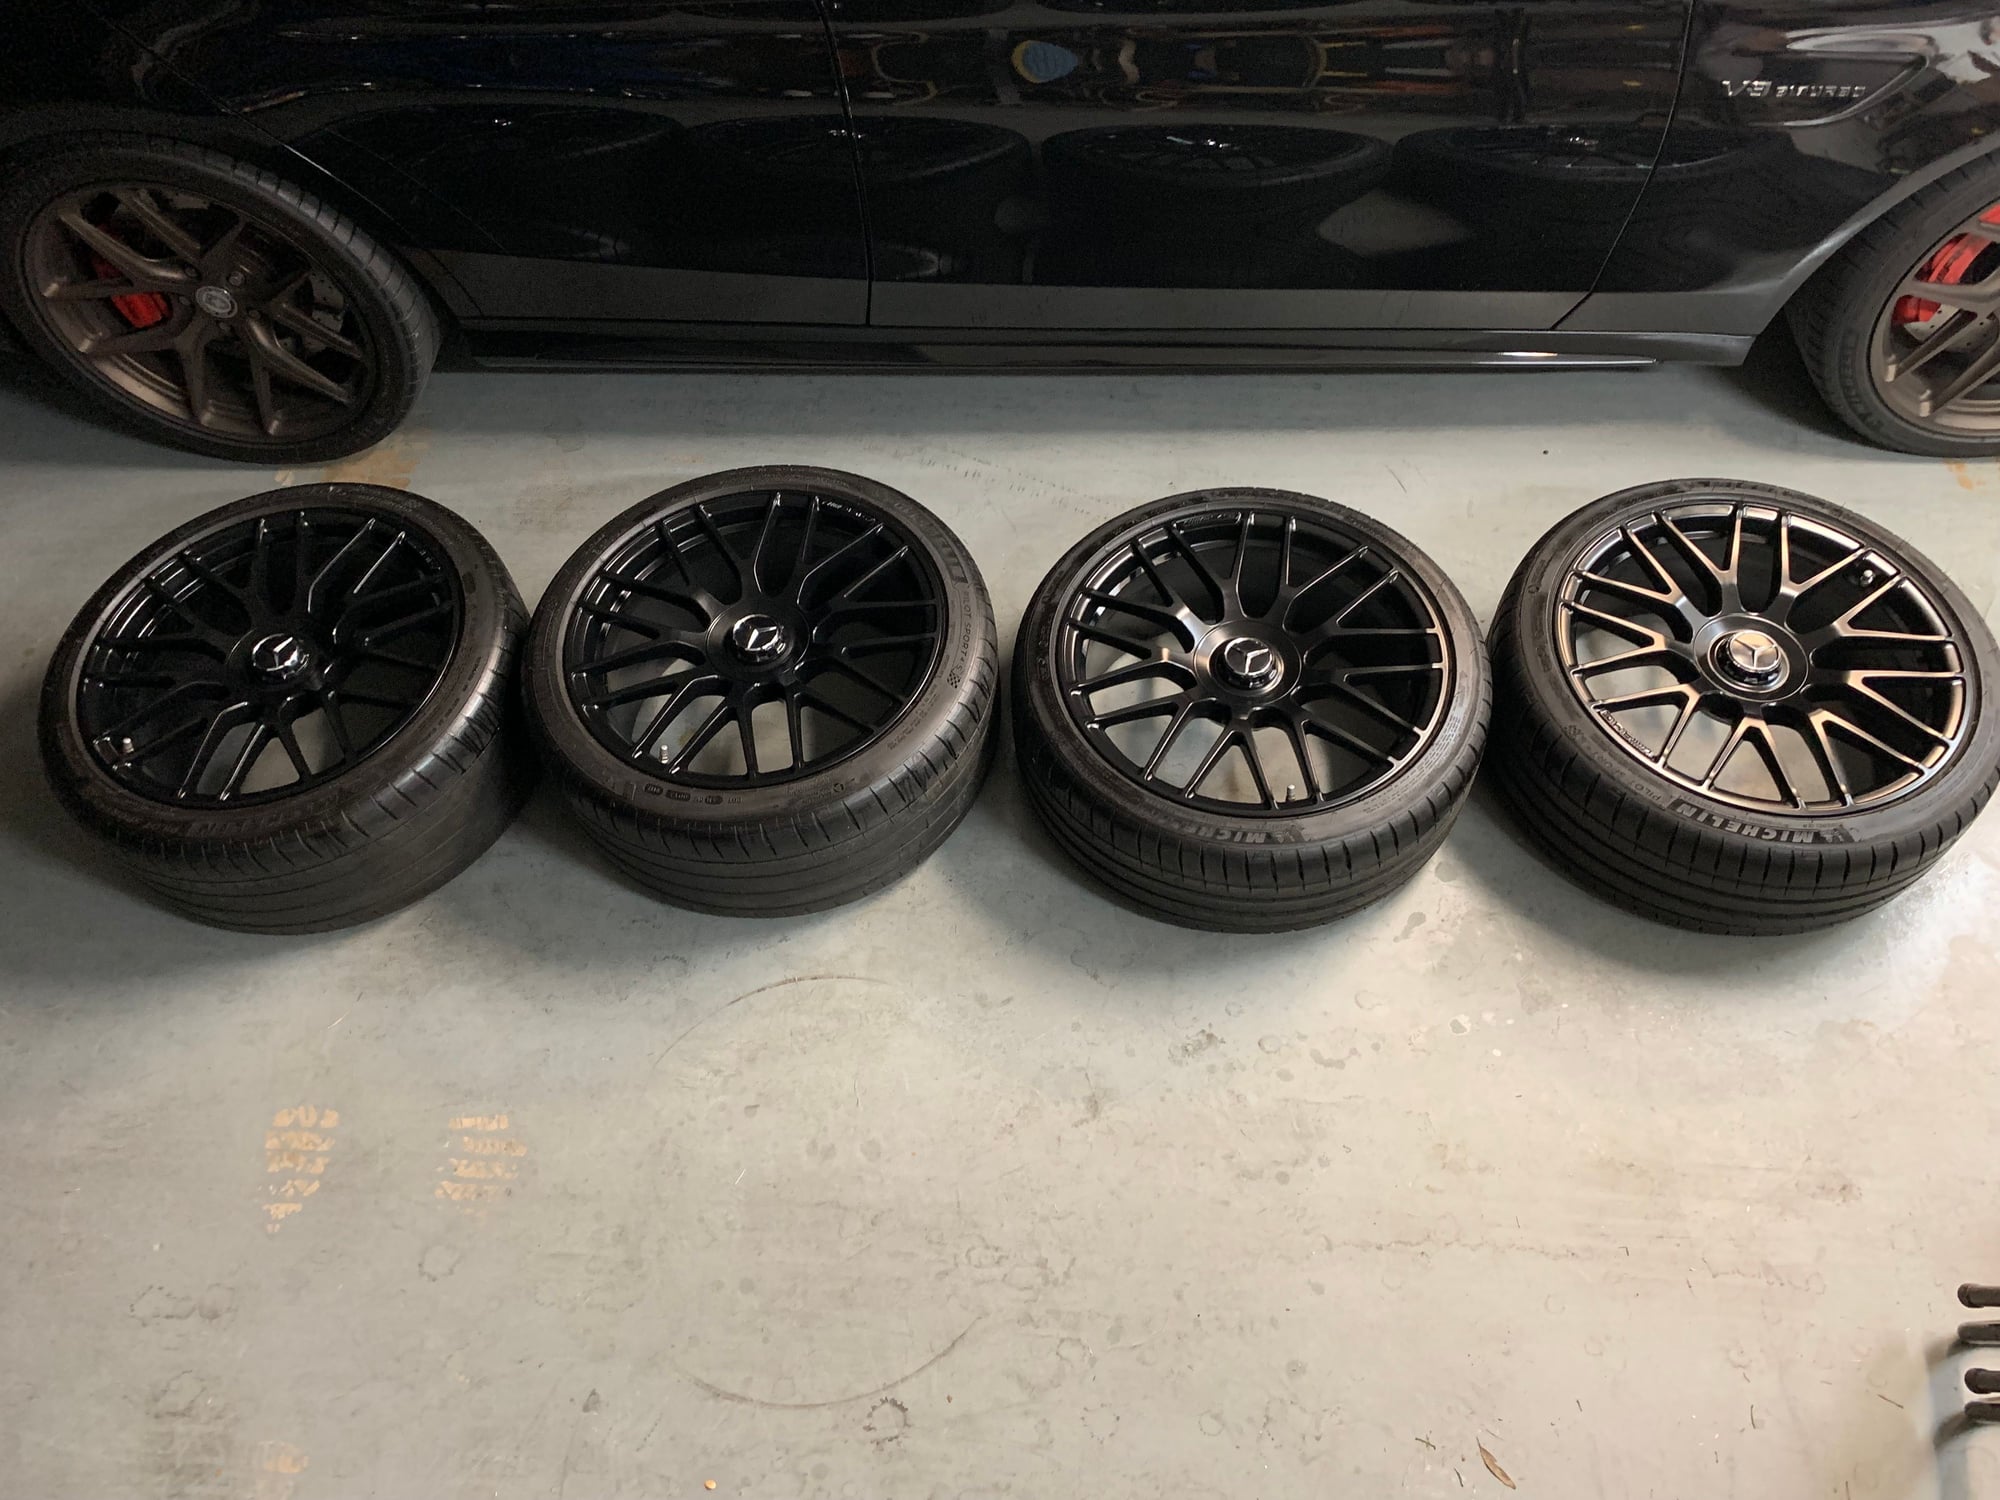 Wheels and Tires/Axles - 19" Mercedes-Benz AMG Forged Multi Spoke Powder Coated Black Wheels and Michelin PS4S - Used - 2008 to 2014 Mercedes-Benz C63 AMG - Scottsdale, AZ 85254, United States